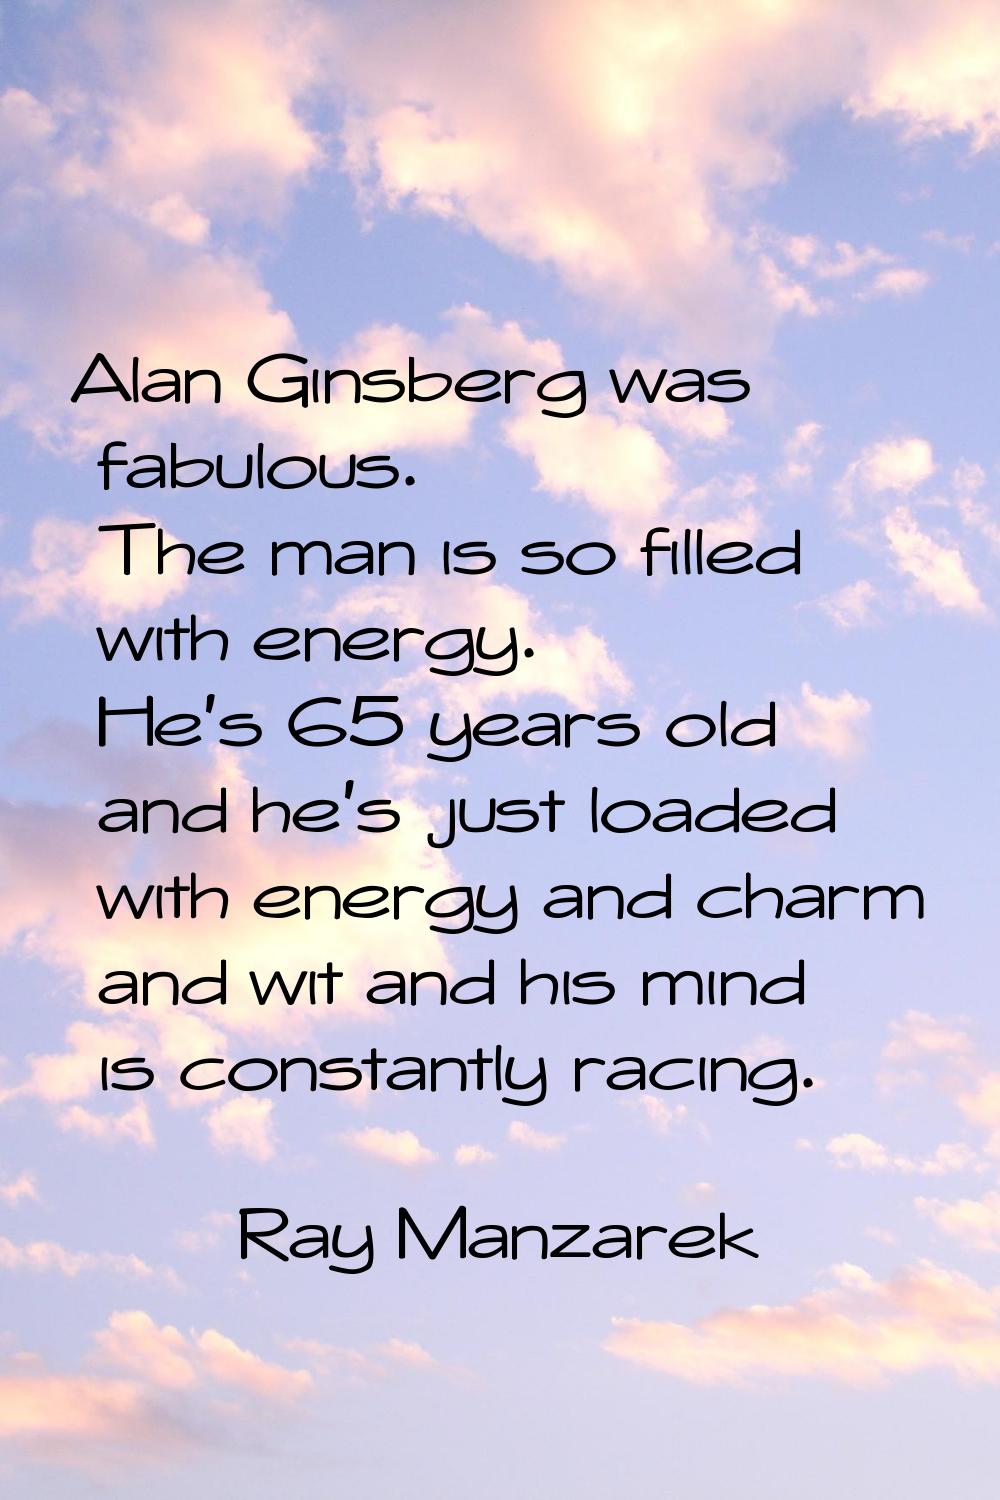 Alan Ginsberg was fabulous. The man is so filled with energy. He's 65 years old and he's just loade